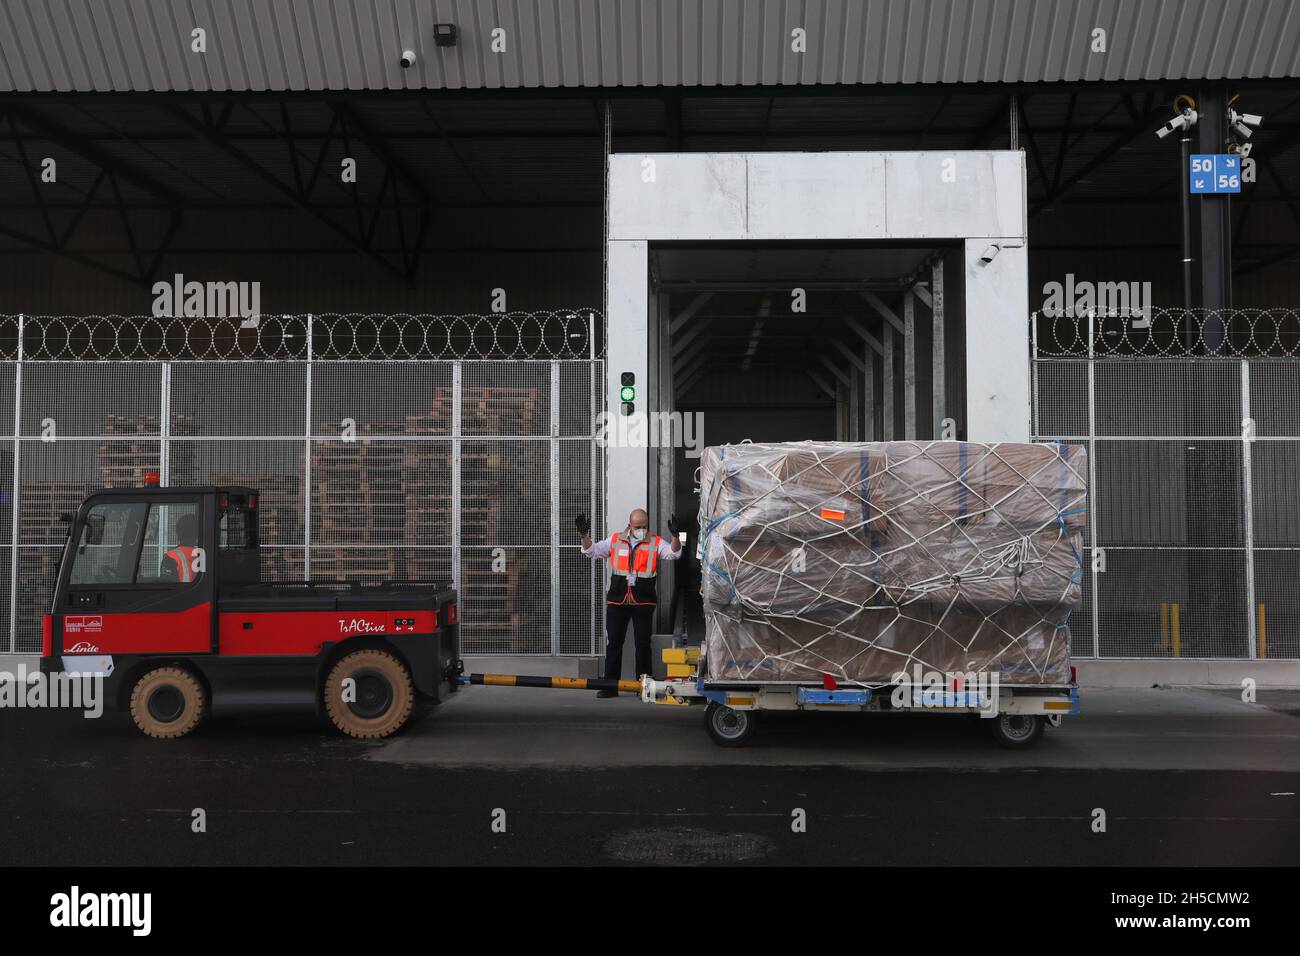 Liege, Belgium. 8th Nov, 2021. People work at Cainiao Network's smart logistics hub at Liege Airport in Grace-Hollogne, Liege Province, Belgium, on Nov. 8, 2021. Cainiao Network, the logistics arm of China's Alibaba Group, officially opened Monday its first smart logistics hub at Liege Airport in Belgium. Credit: Zheng Huansong/Xinhua/Alamy Live News Stock Photo